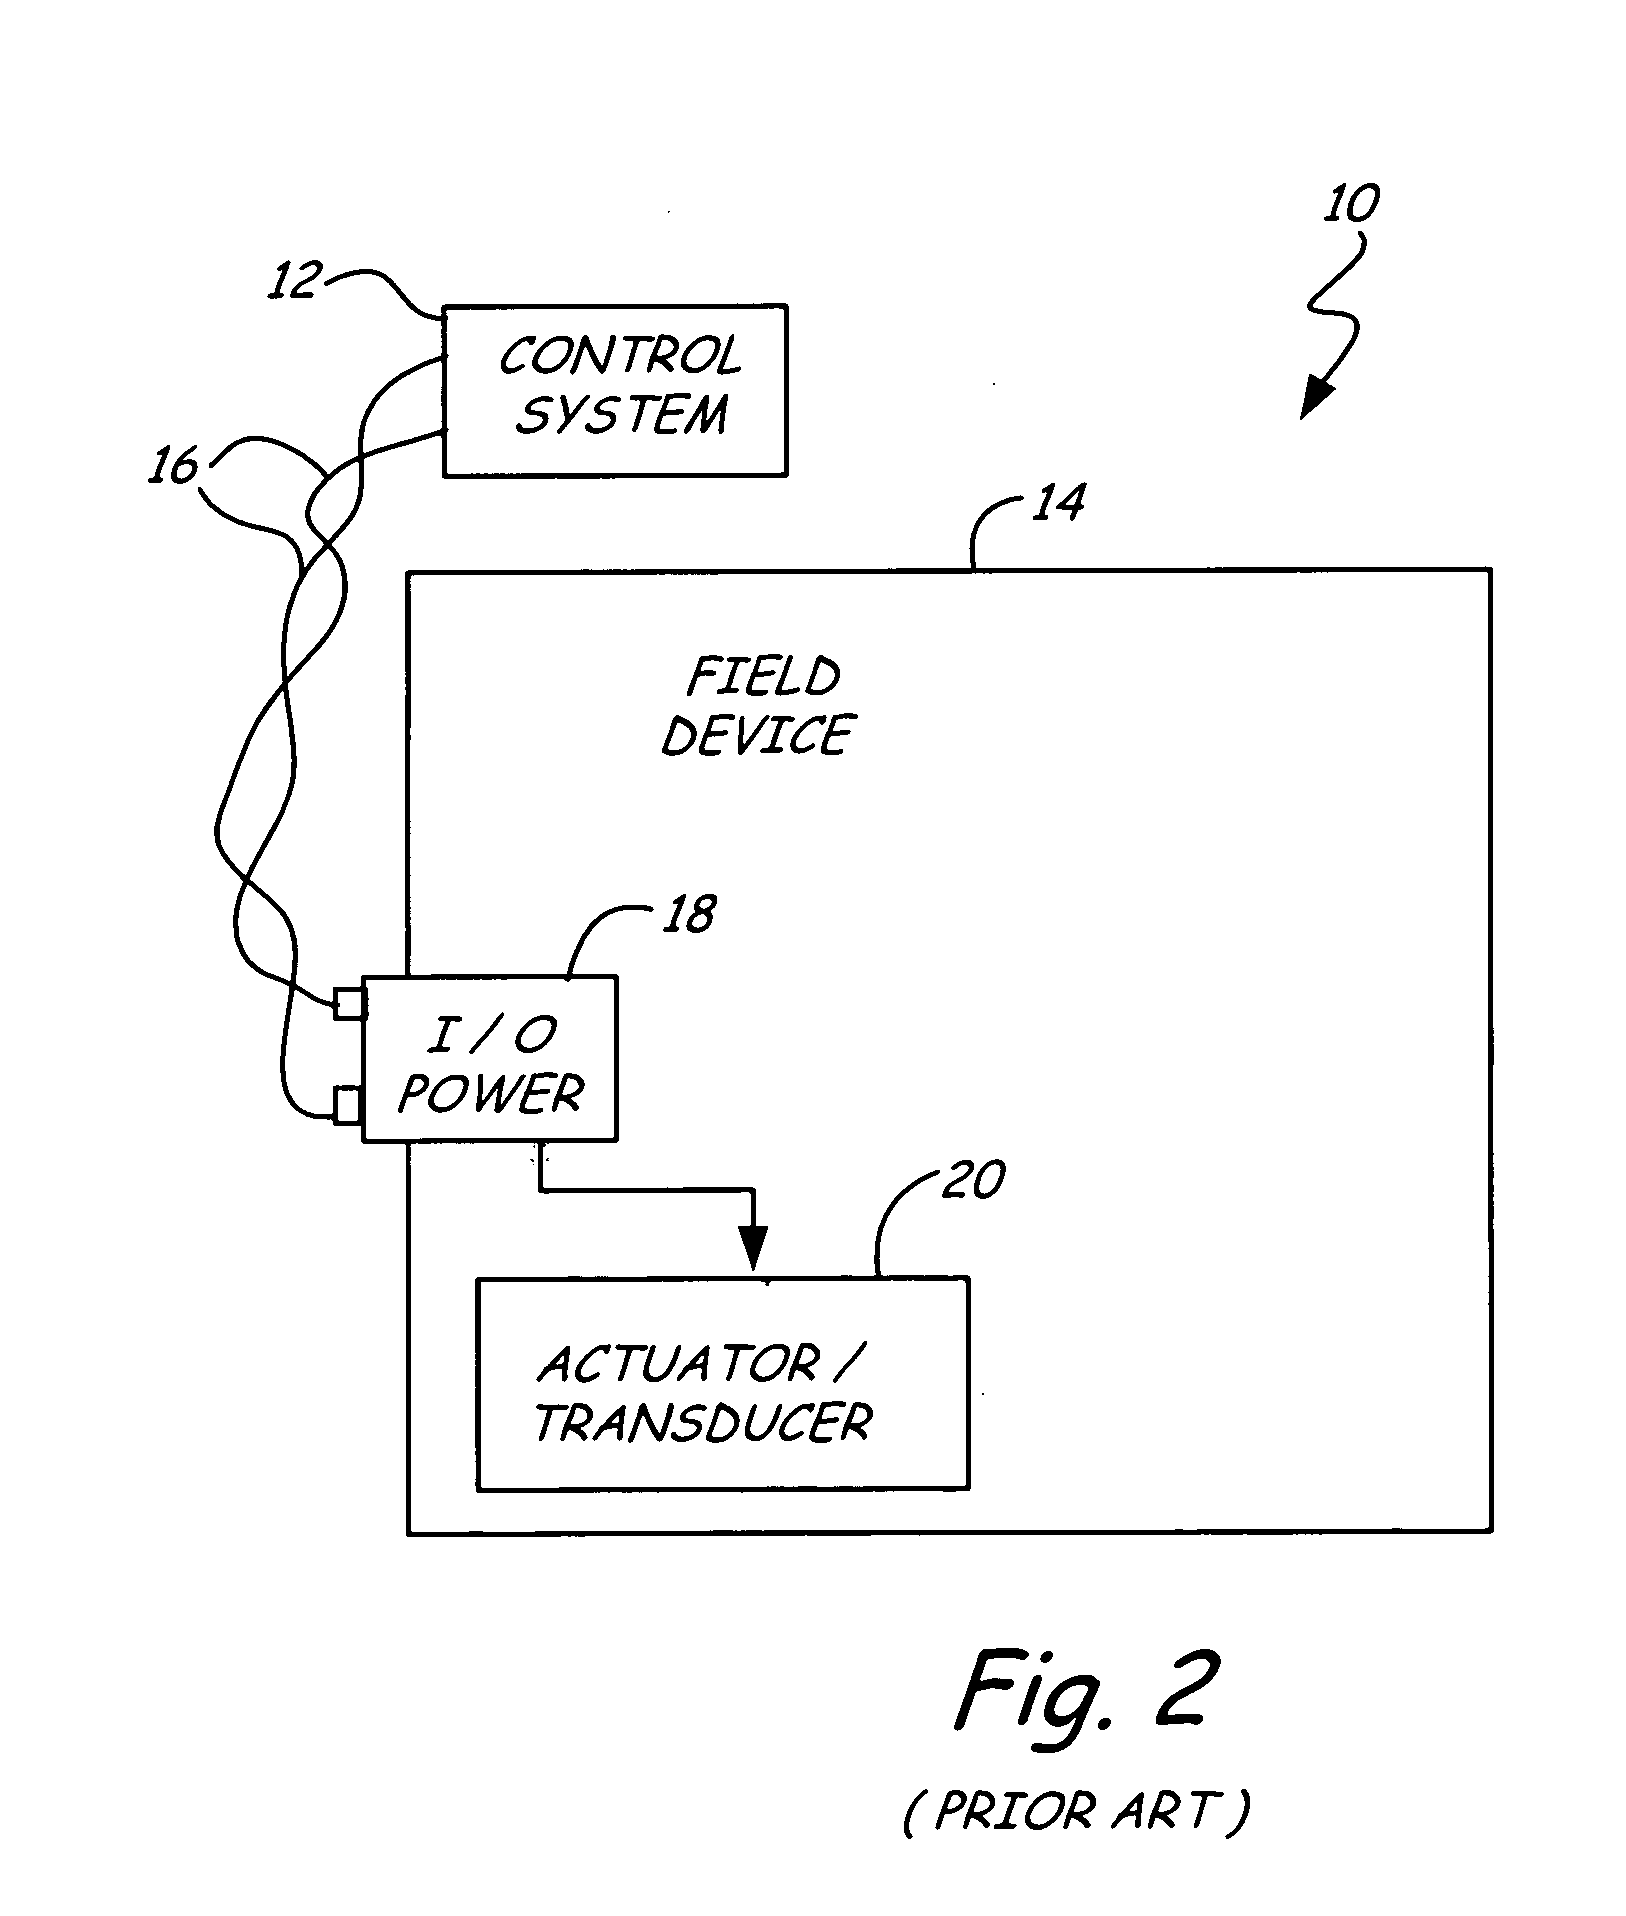 Wireless power and communication unit for process field devices